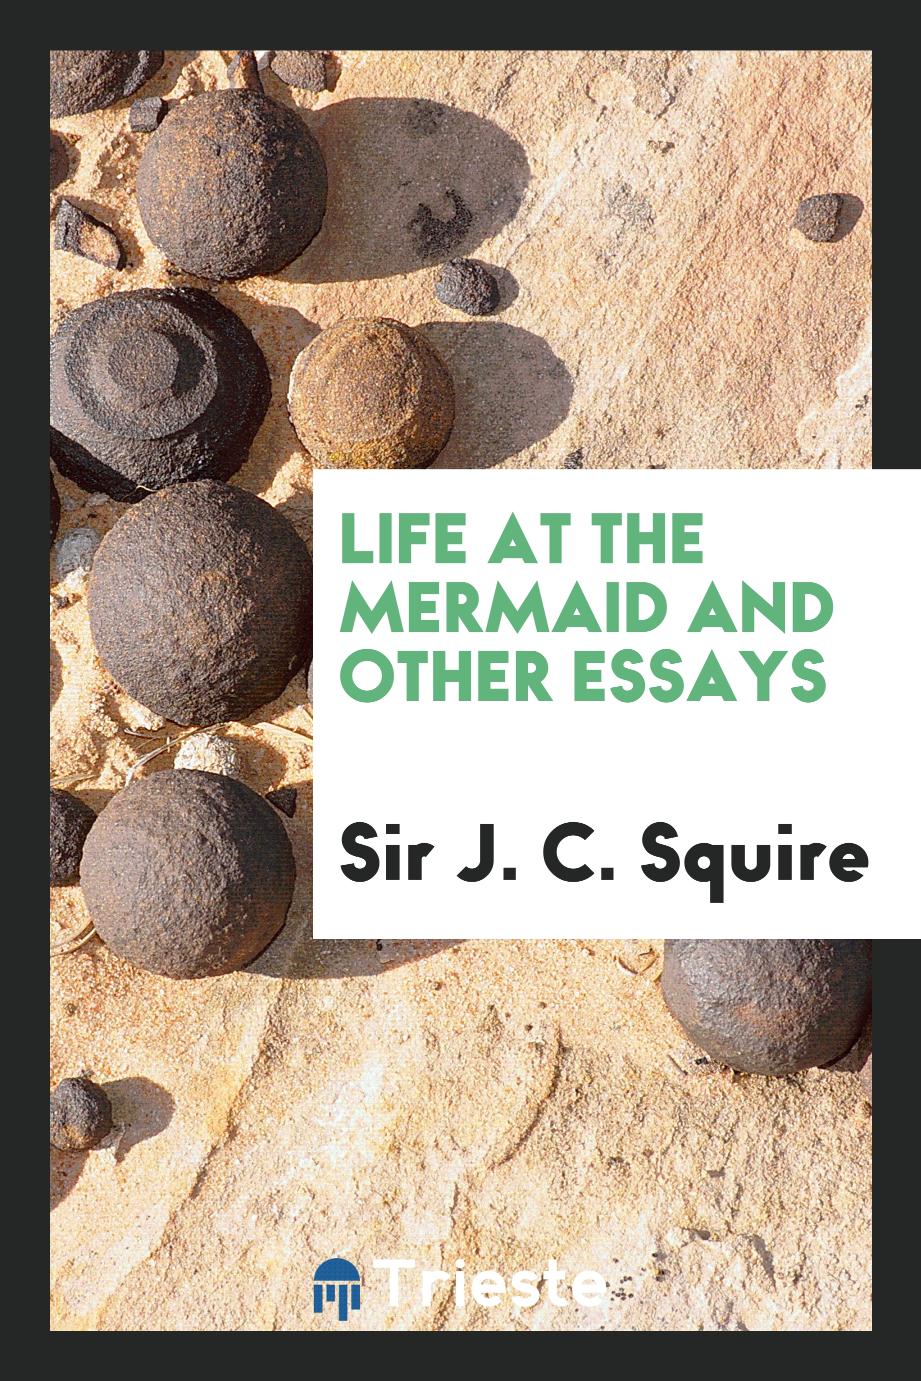 Life at the Mermaid and other essays